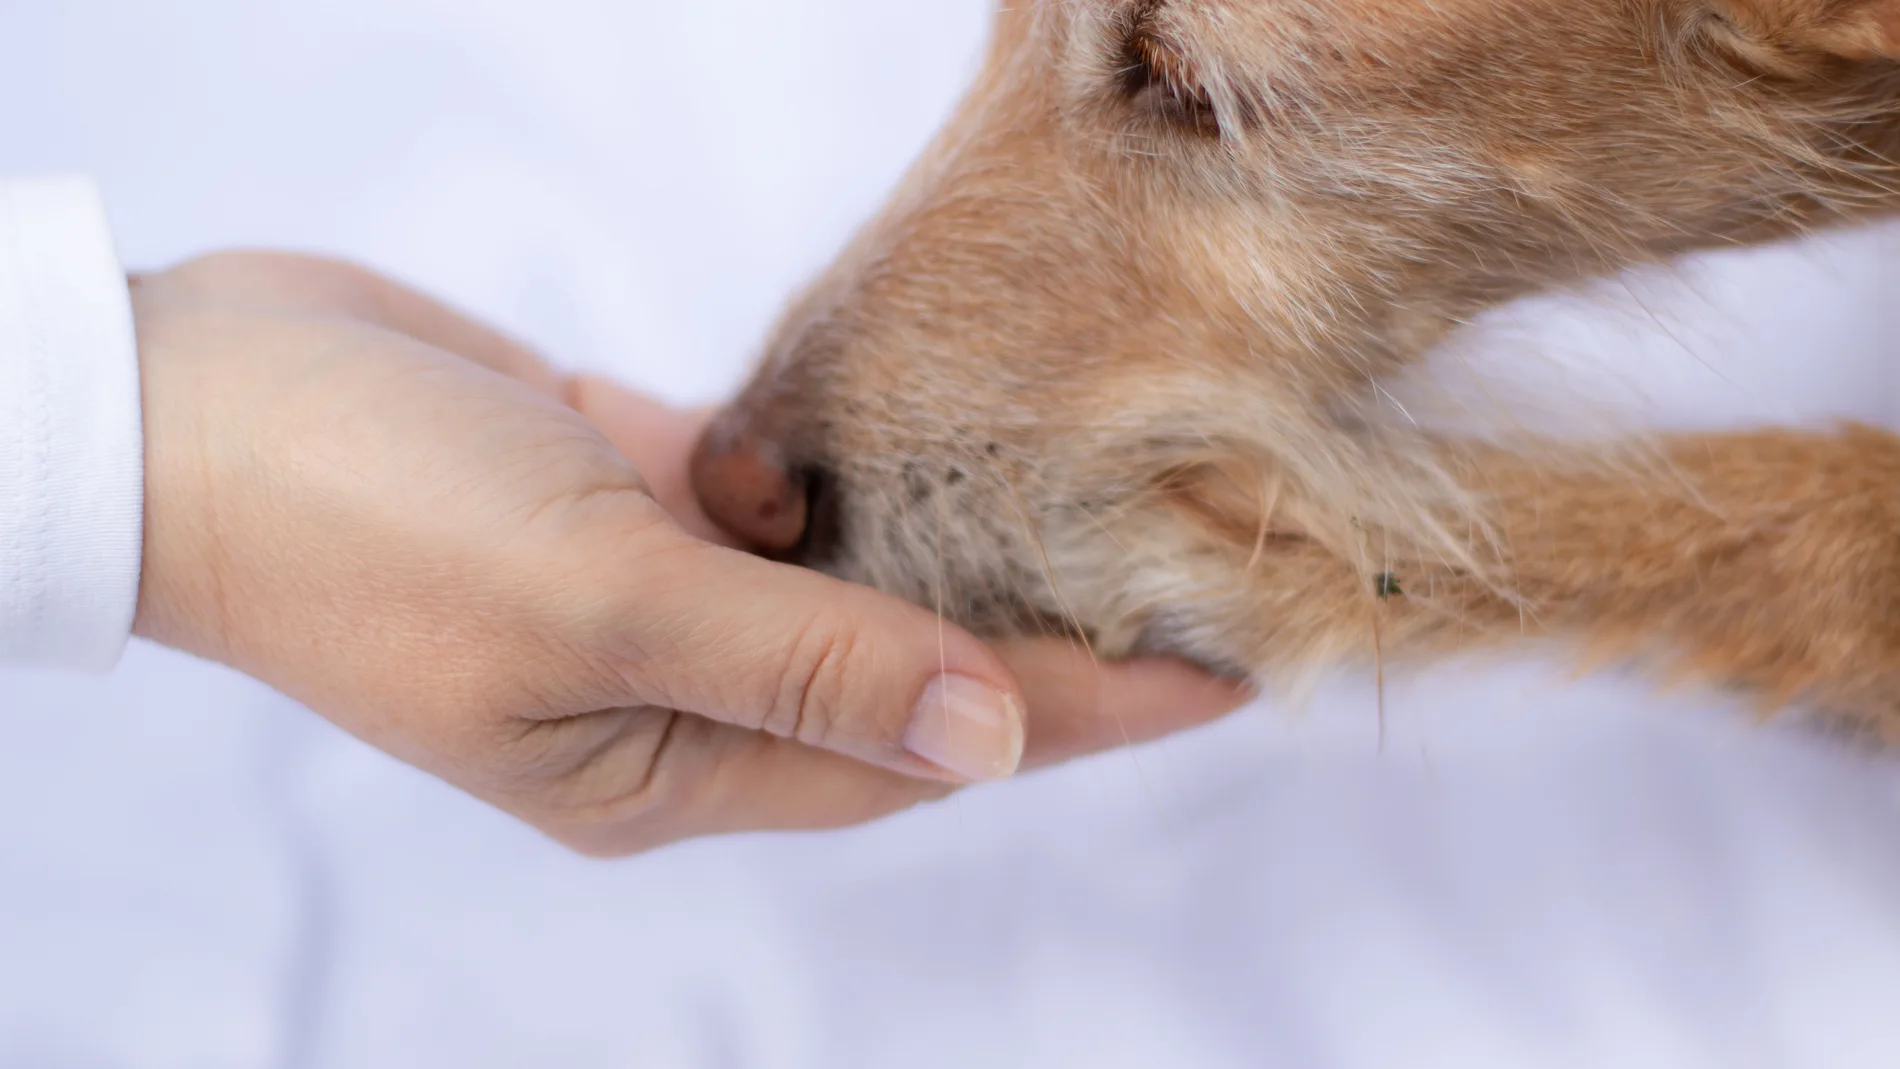 Dog paw touches human hand as a sign for trust, love and for a feeling of security